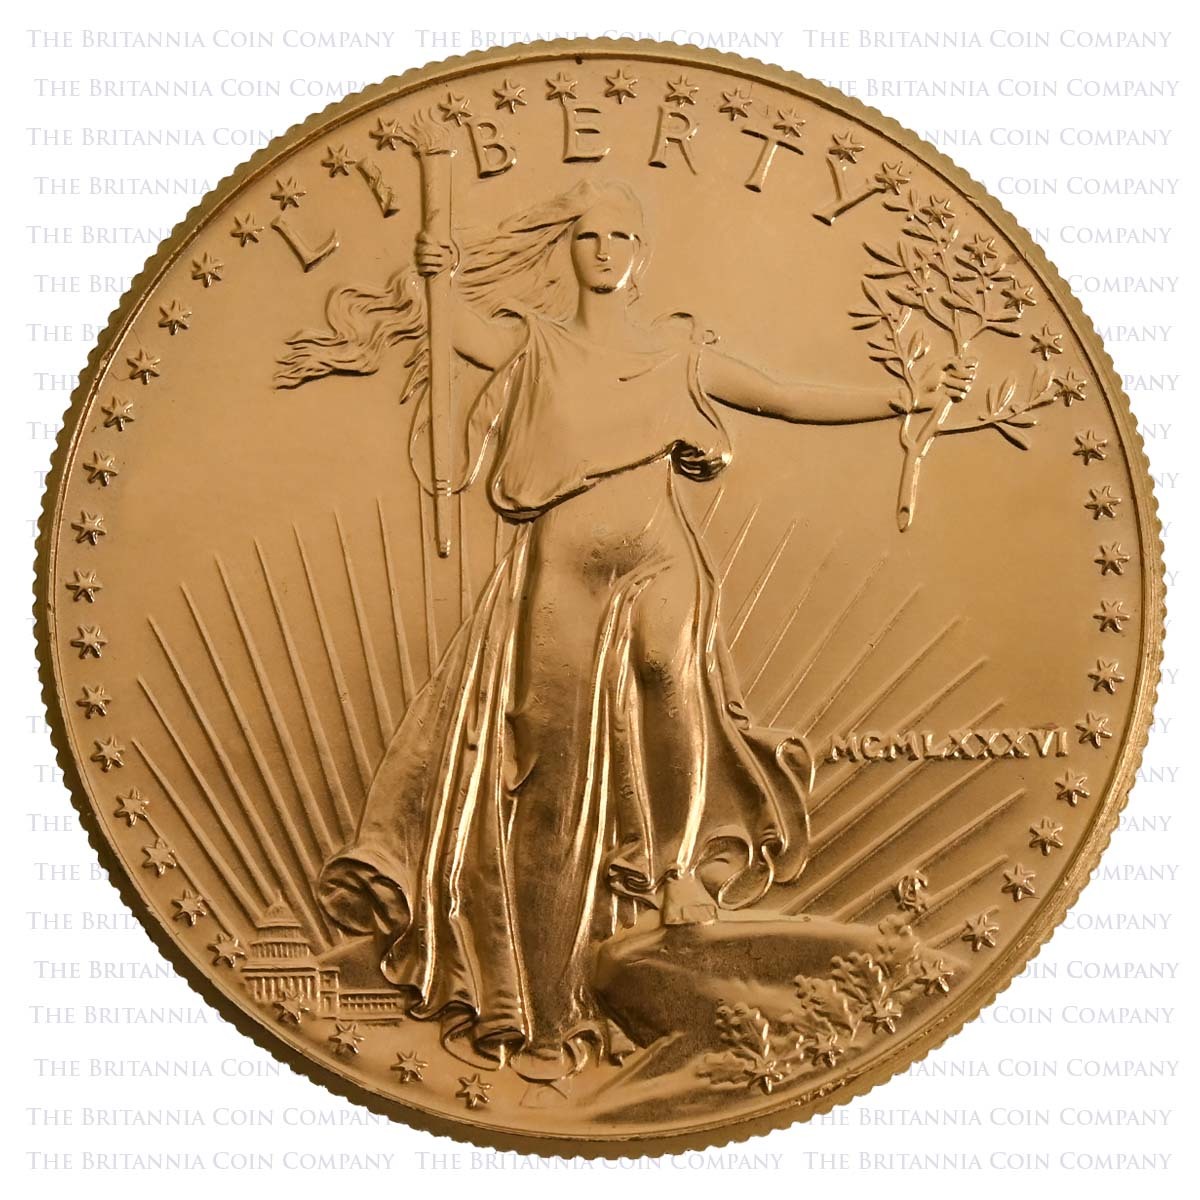 1 Ounce American Gold Eagle 22 Carat (Best Value) Obverse